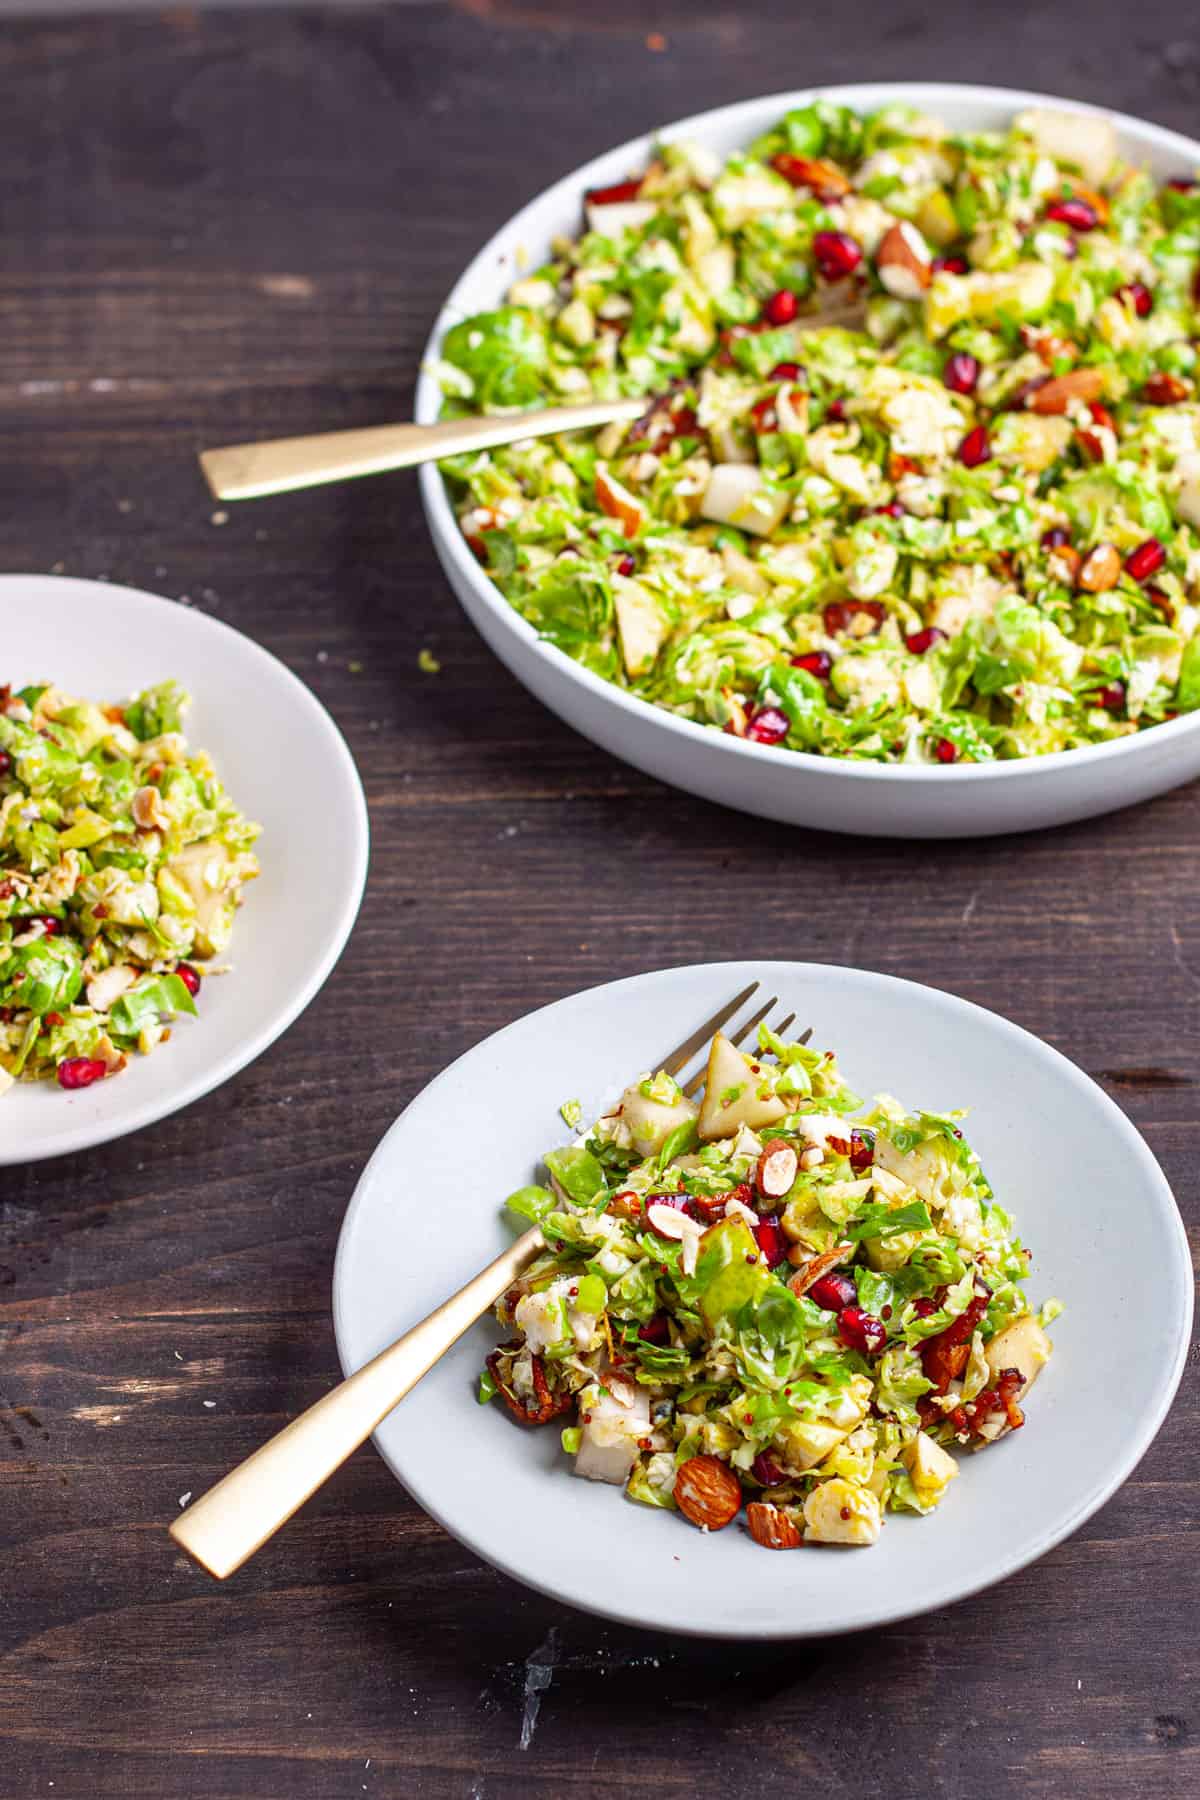 A large bowl of brussels sprouts salad with bacon and fig jam along with two servings on smaller plater on a dark table.